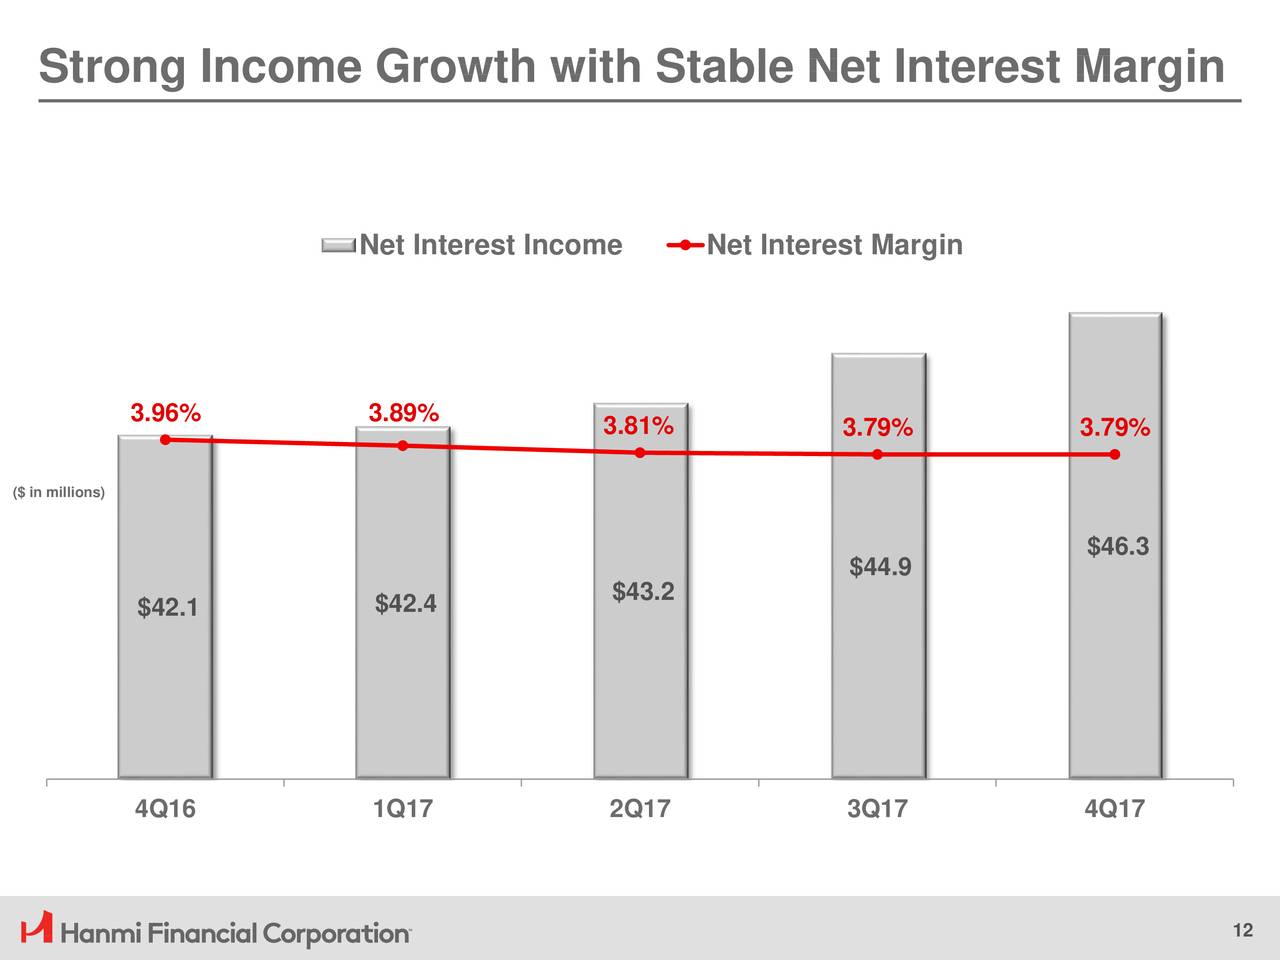 Strong Income Growth with Stable Net Interest Margin